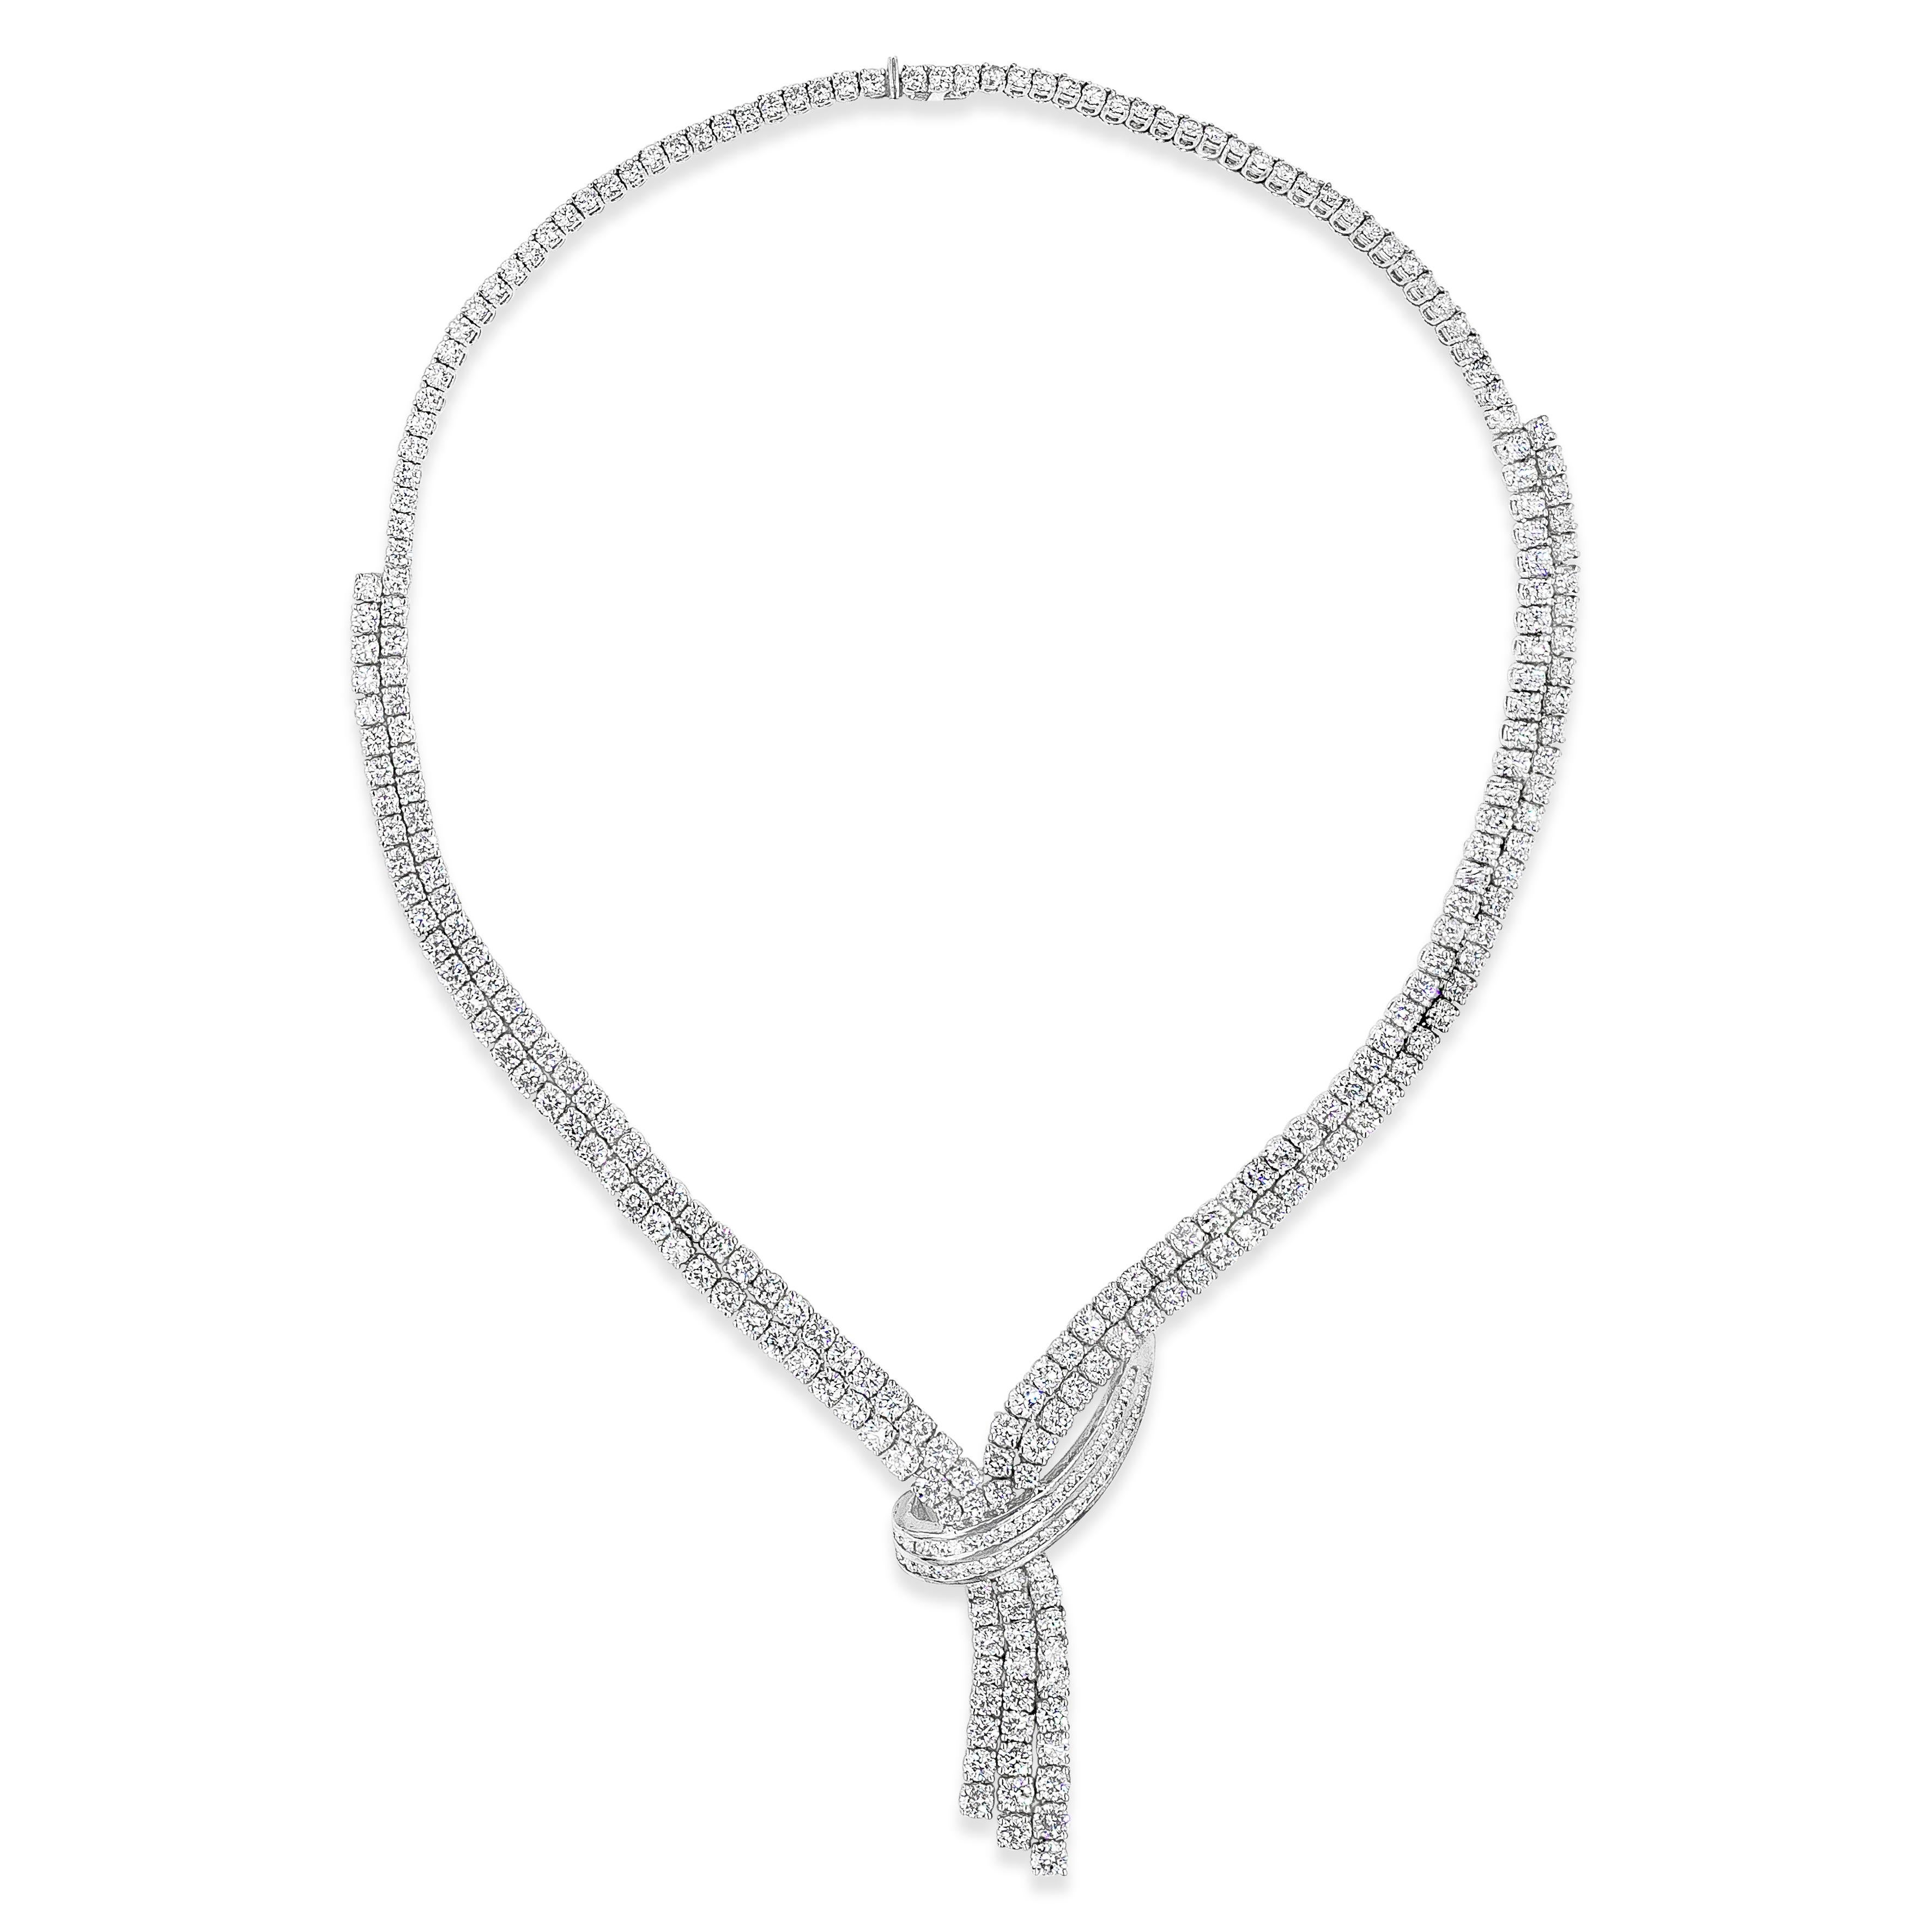 A beautiful and important drop necklace showcasing two rows of round brilliant diamonds that elegantly drop and divide into three rows of diamonds. Diamonds weigh 24.28 carats total. Finely made in 18k white gold and 20.12 inches in length. Also has